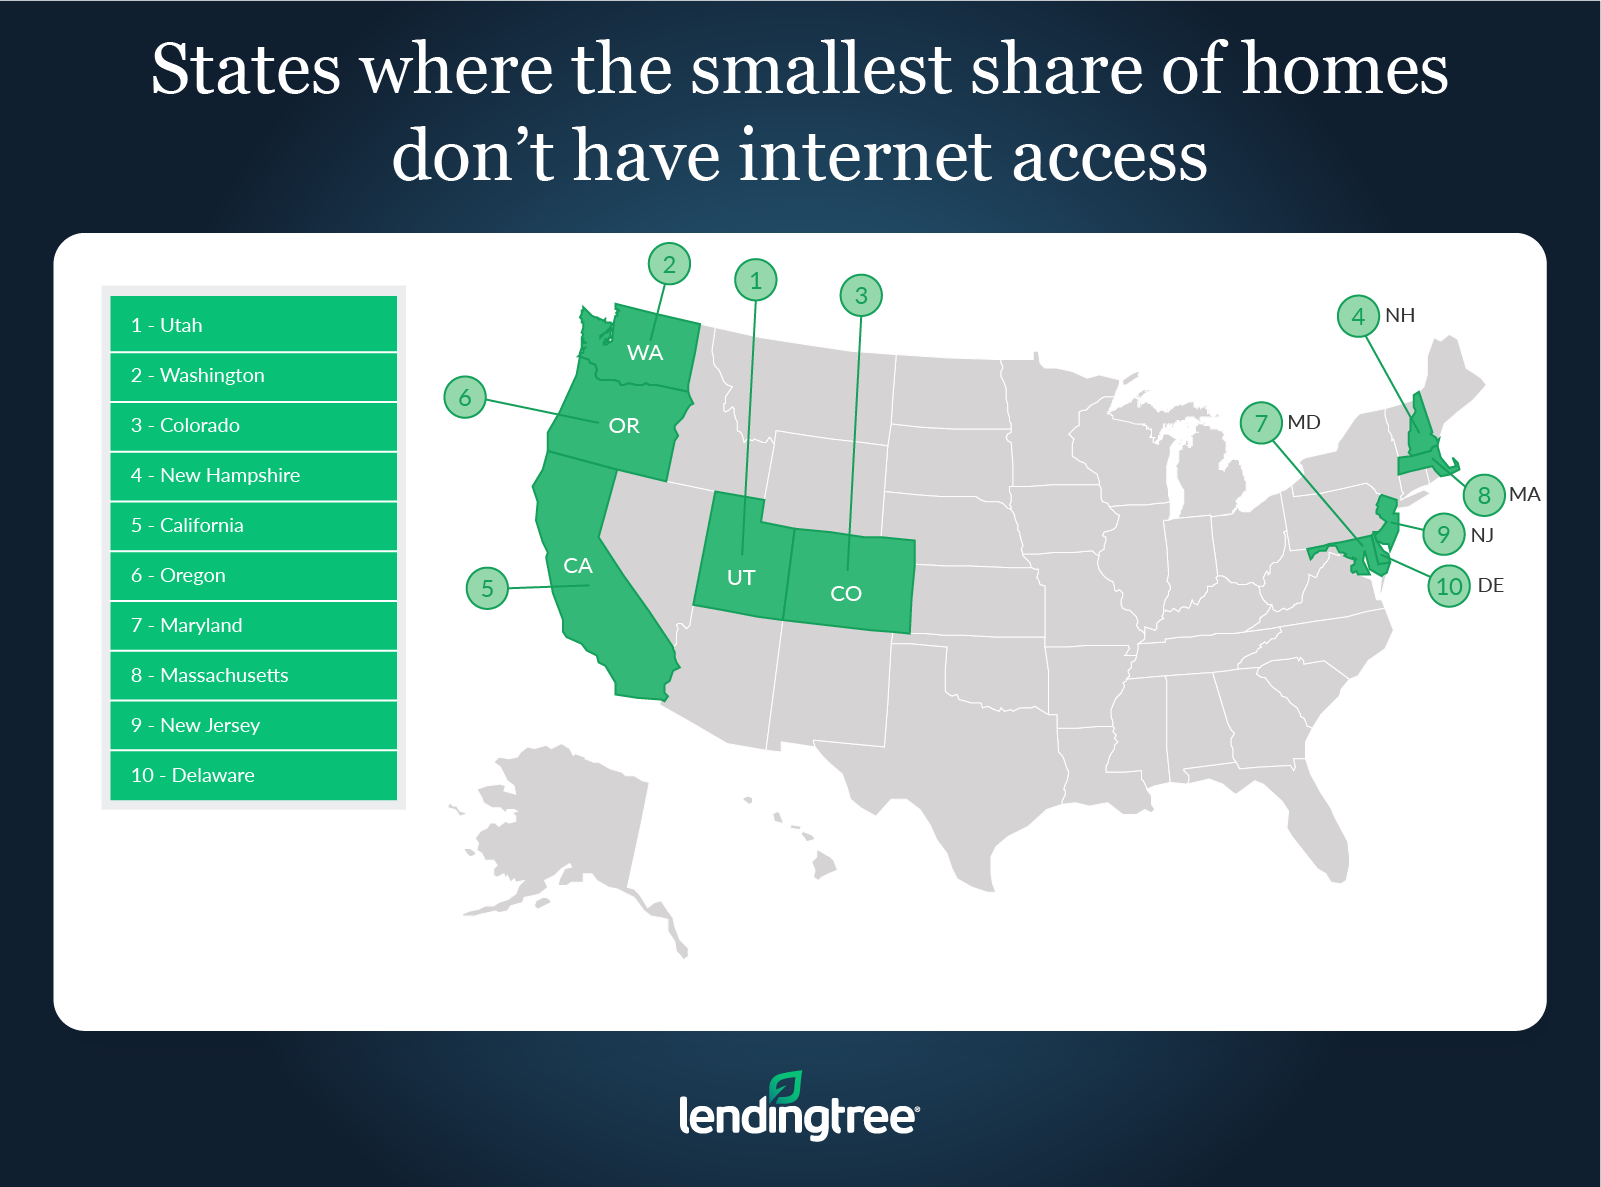  More Than 14 Million Households Across U.S. Dont Have Internet